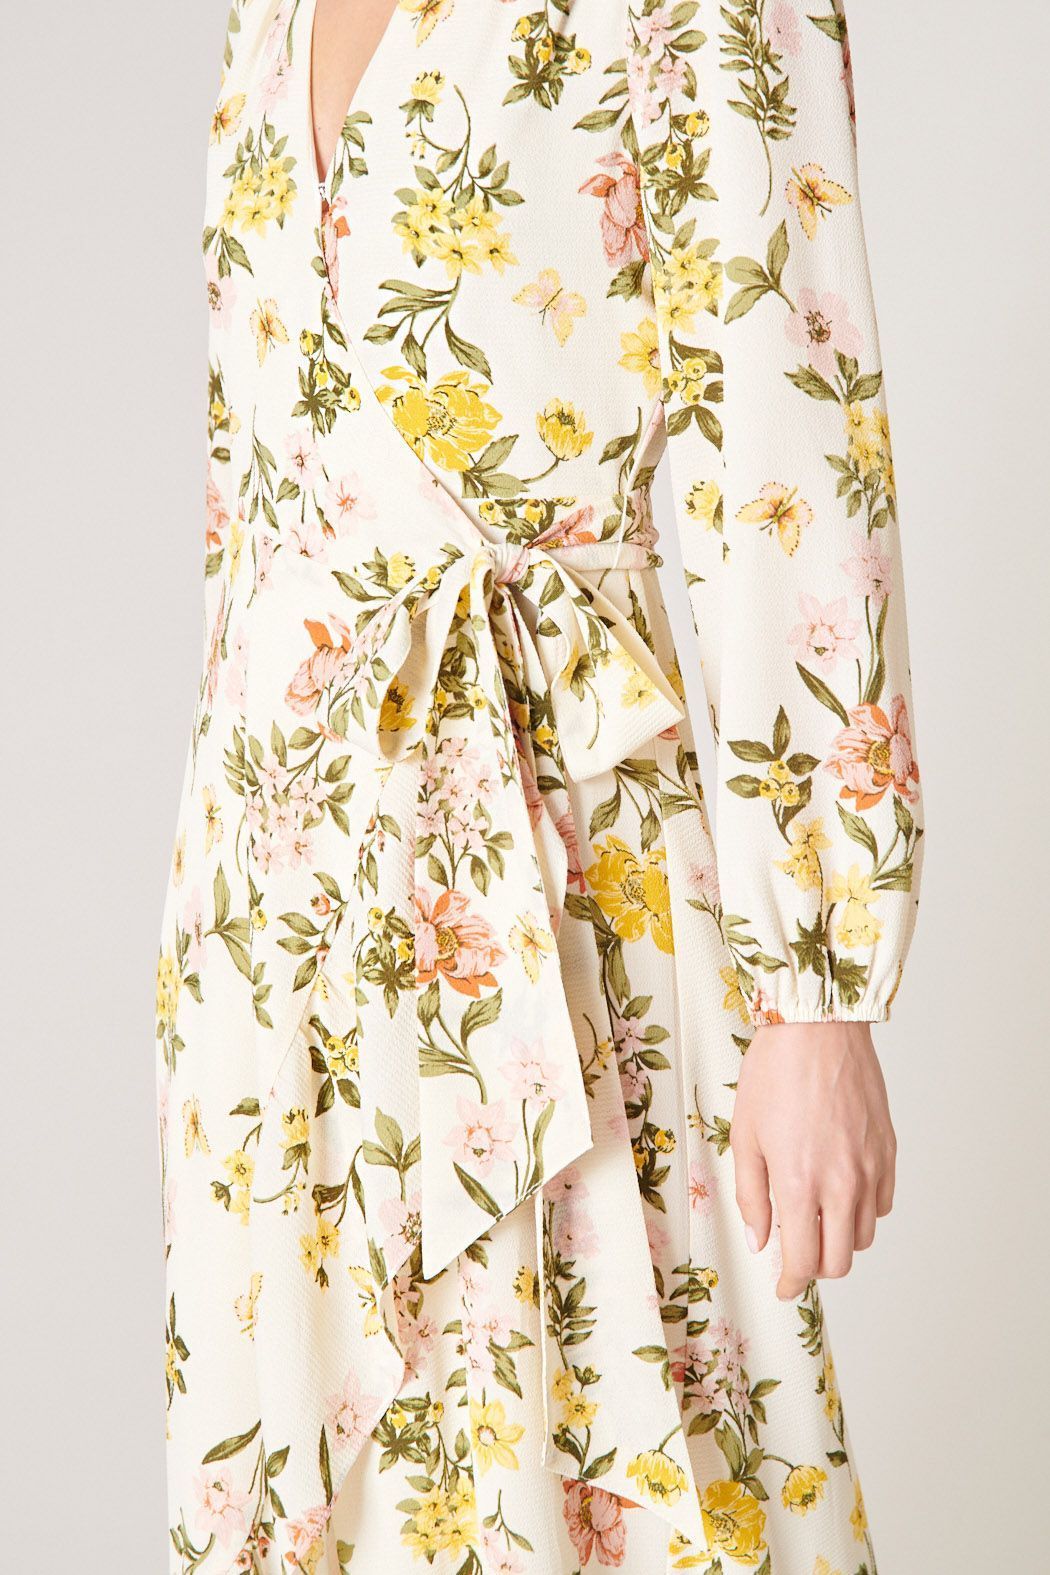 Model wearing the Ashlynn Floral Califa Maxi Wrap Dress by SUGARLIPS, featuring a flowing high-low hemline, long sleeves, and a vibrant print of yellow and pink flowers against a light cream background, complemented by beige strappy heels